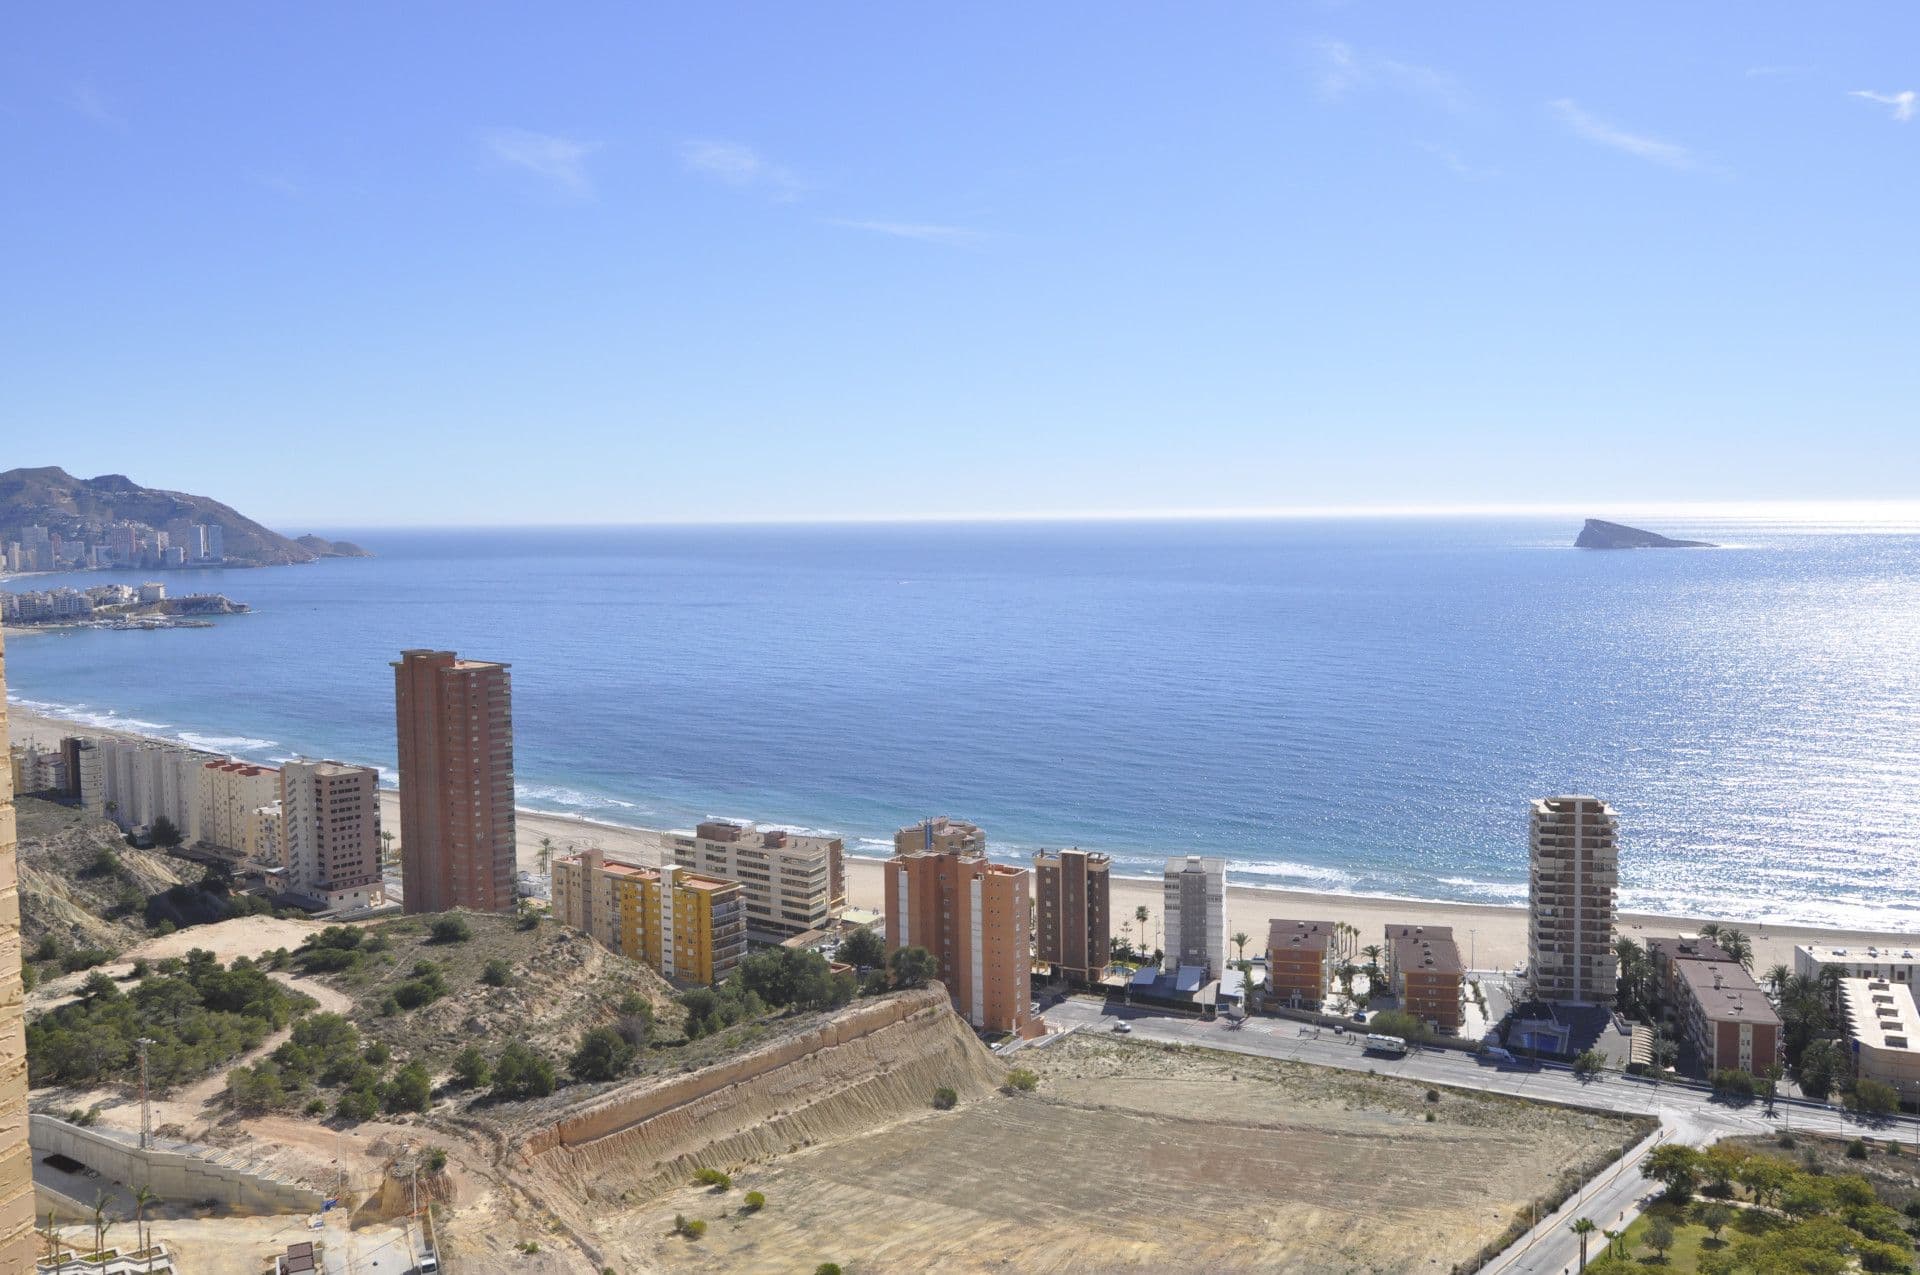 Luxury penthouse with views of the sea in Benidorm, Alicante.